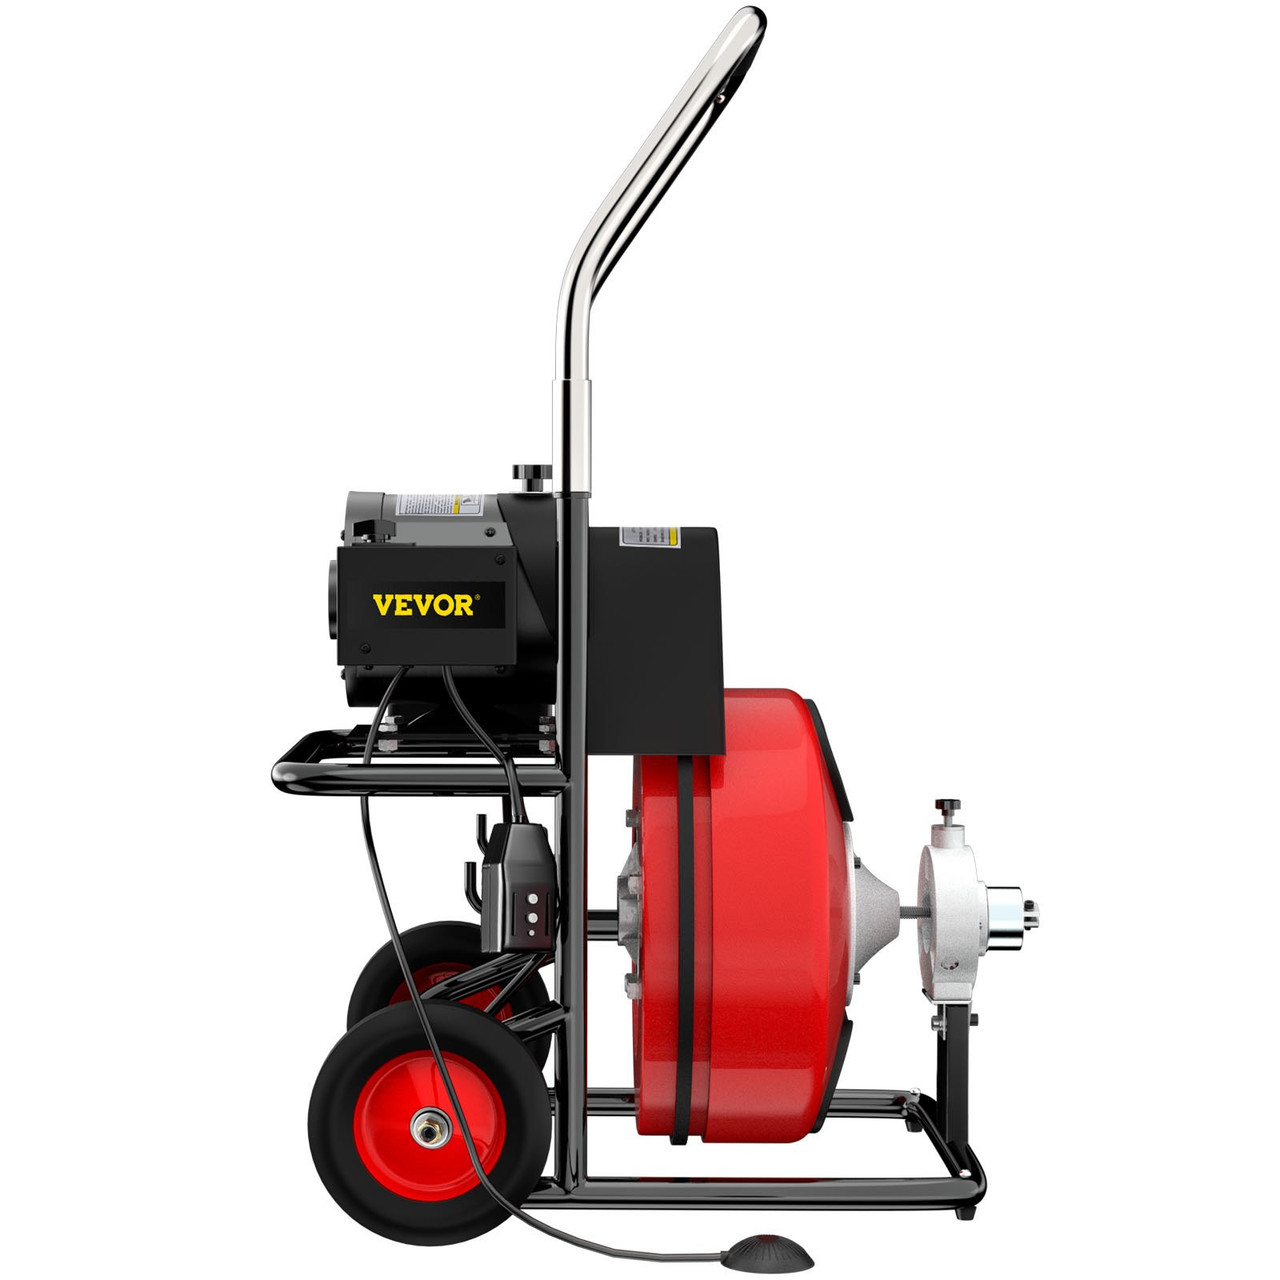 VEVOR 50' x 1/2 Drain Cleaning Machine Drum Auger Drain Cleaner 370W Plumbing Tools